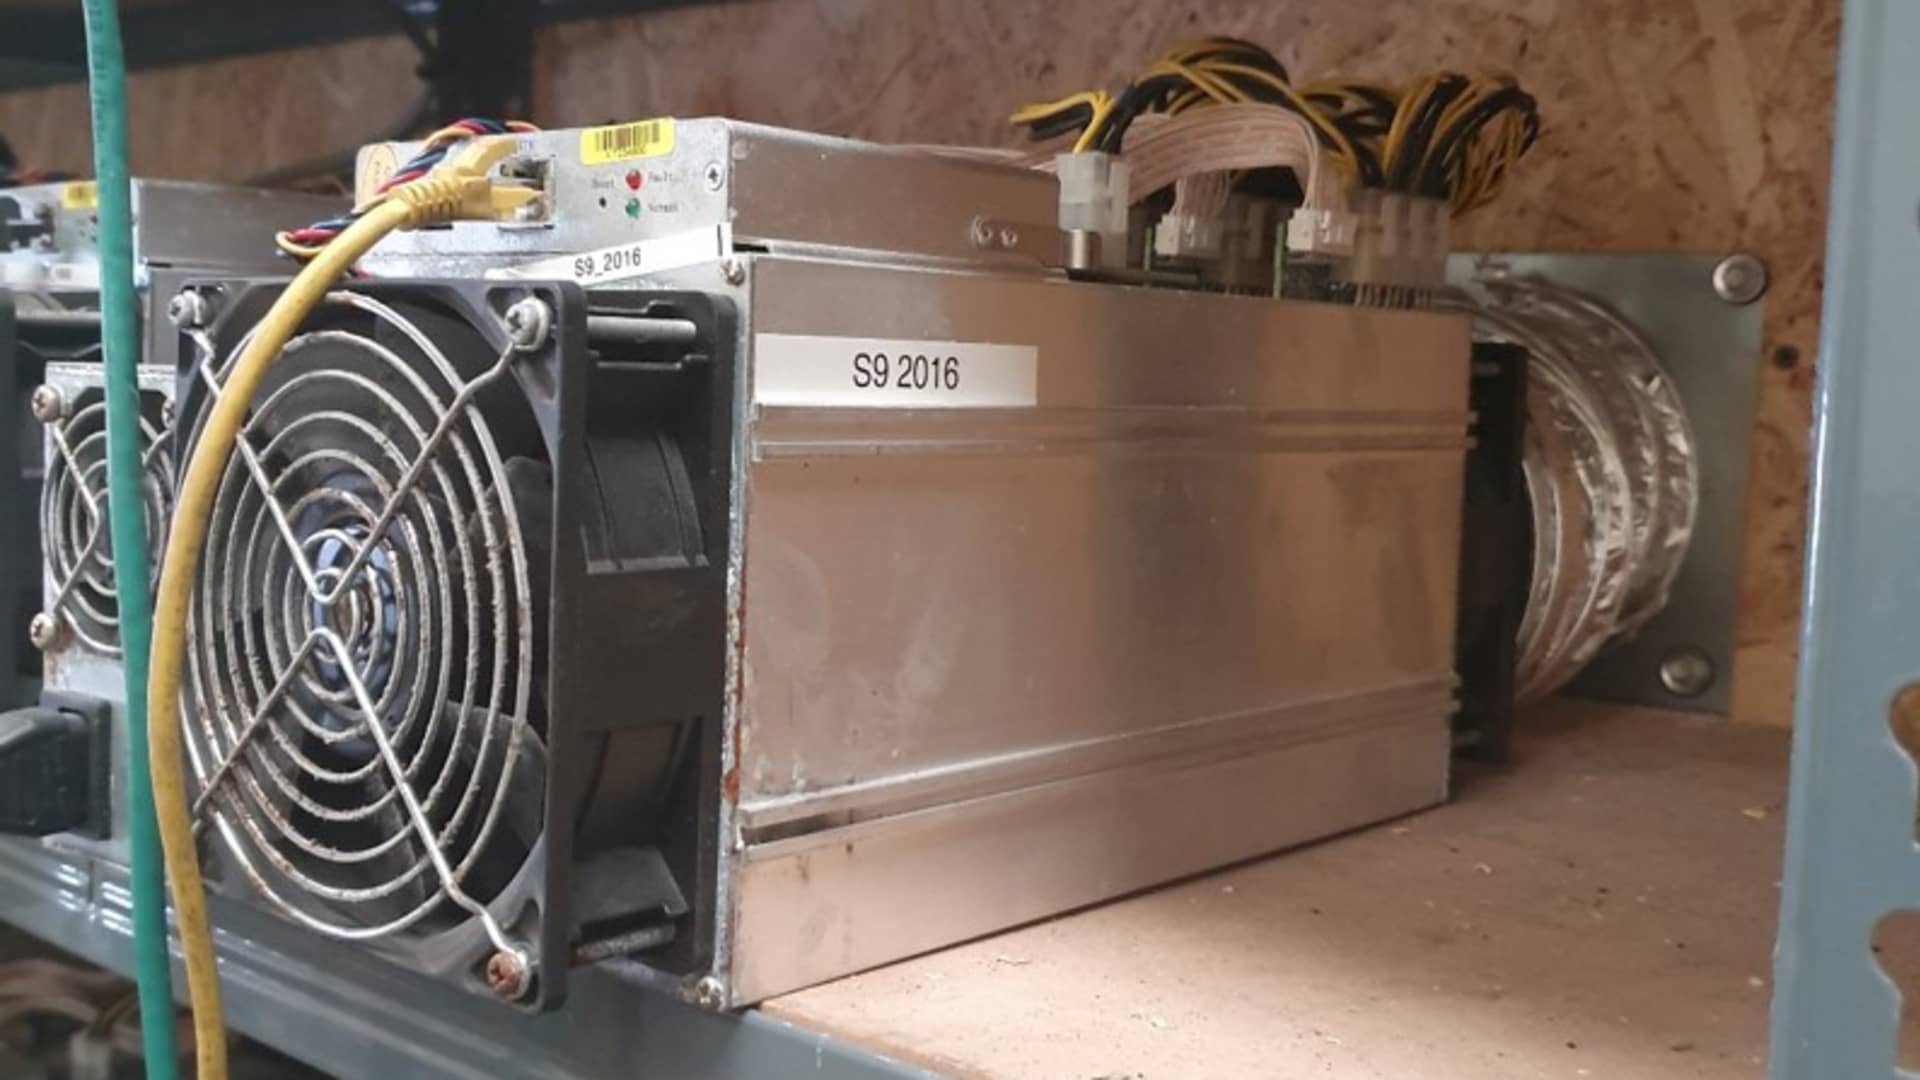 Bitcoin mine uncovered during Black Country industrial unit raid.